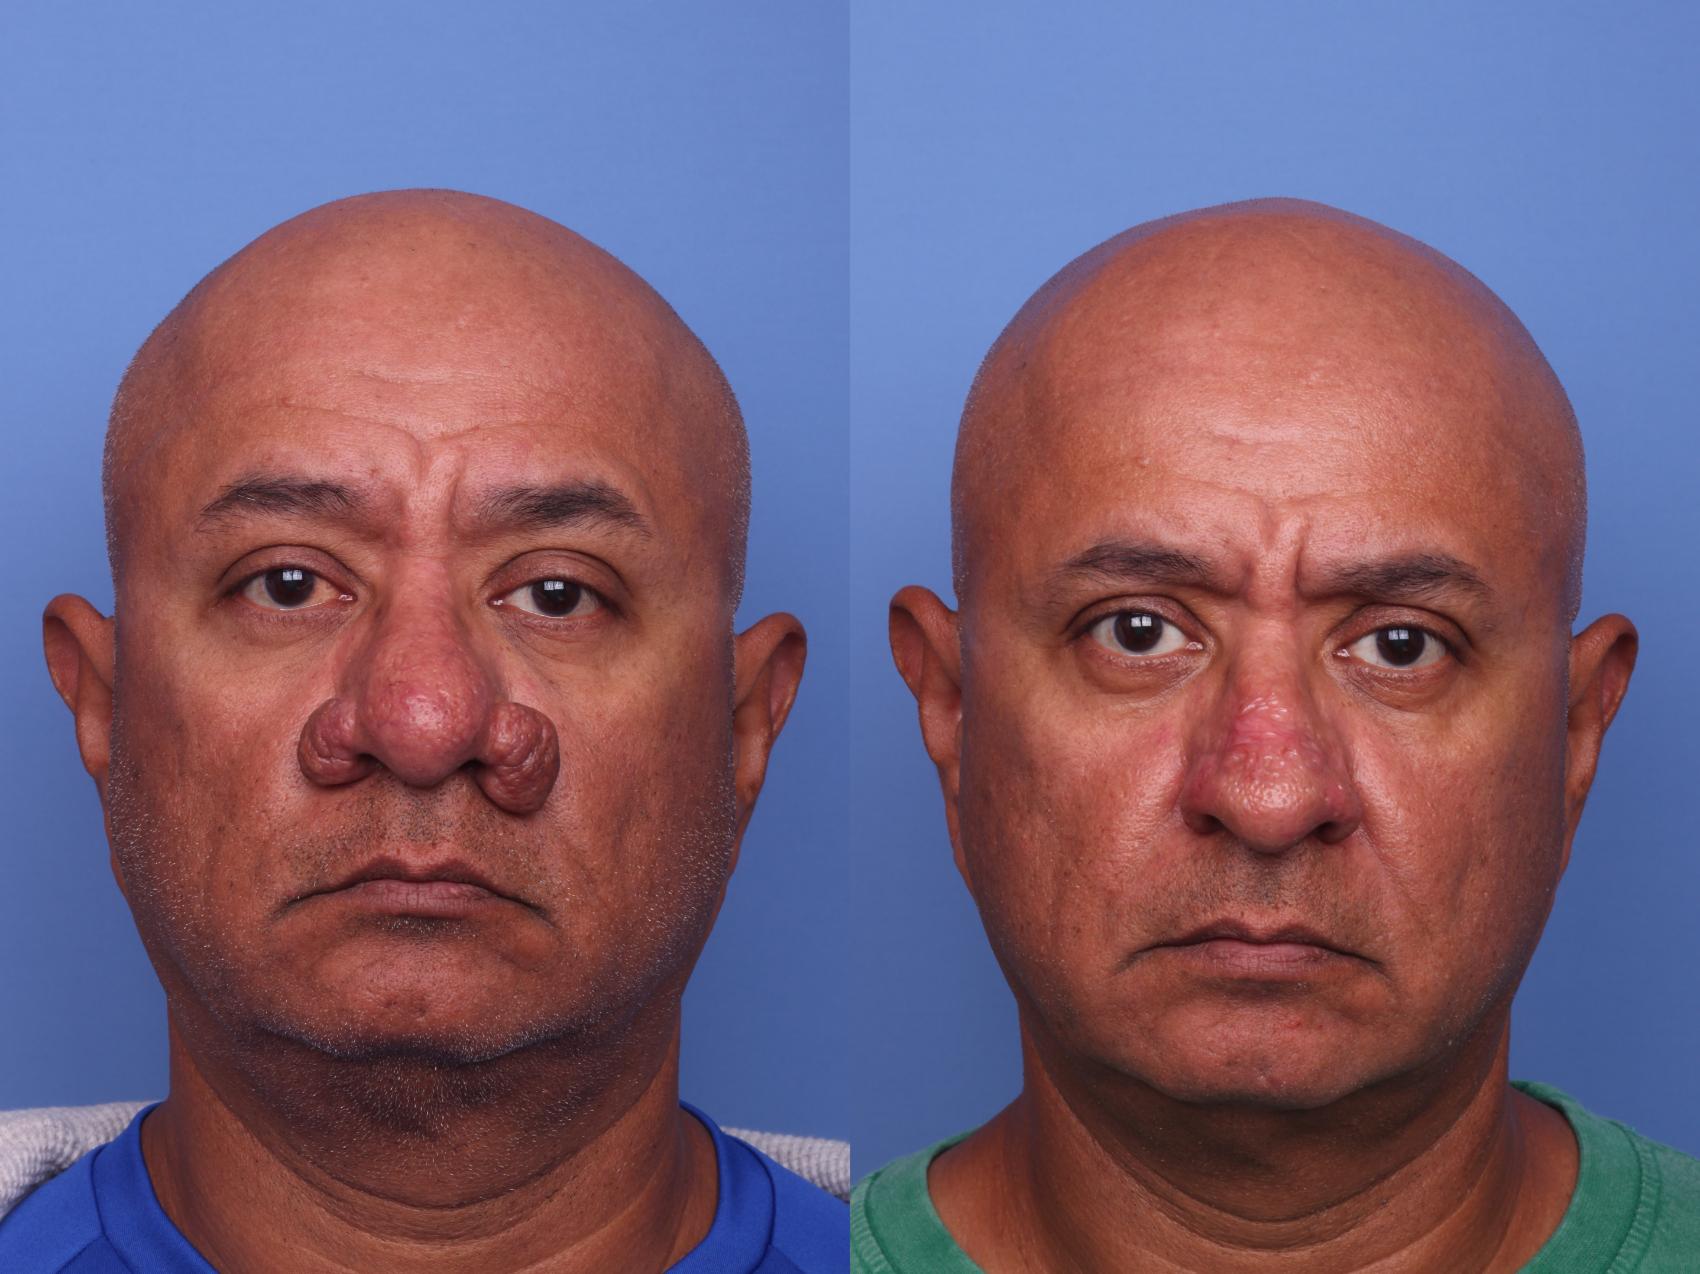 Rhynophyma Dermabrasion Before & After Photo | Scottsdale, AZ | Hobgood Facial Plastic Surgery: Todd Hobgood, MD